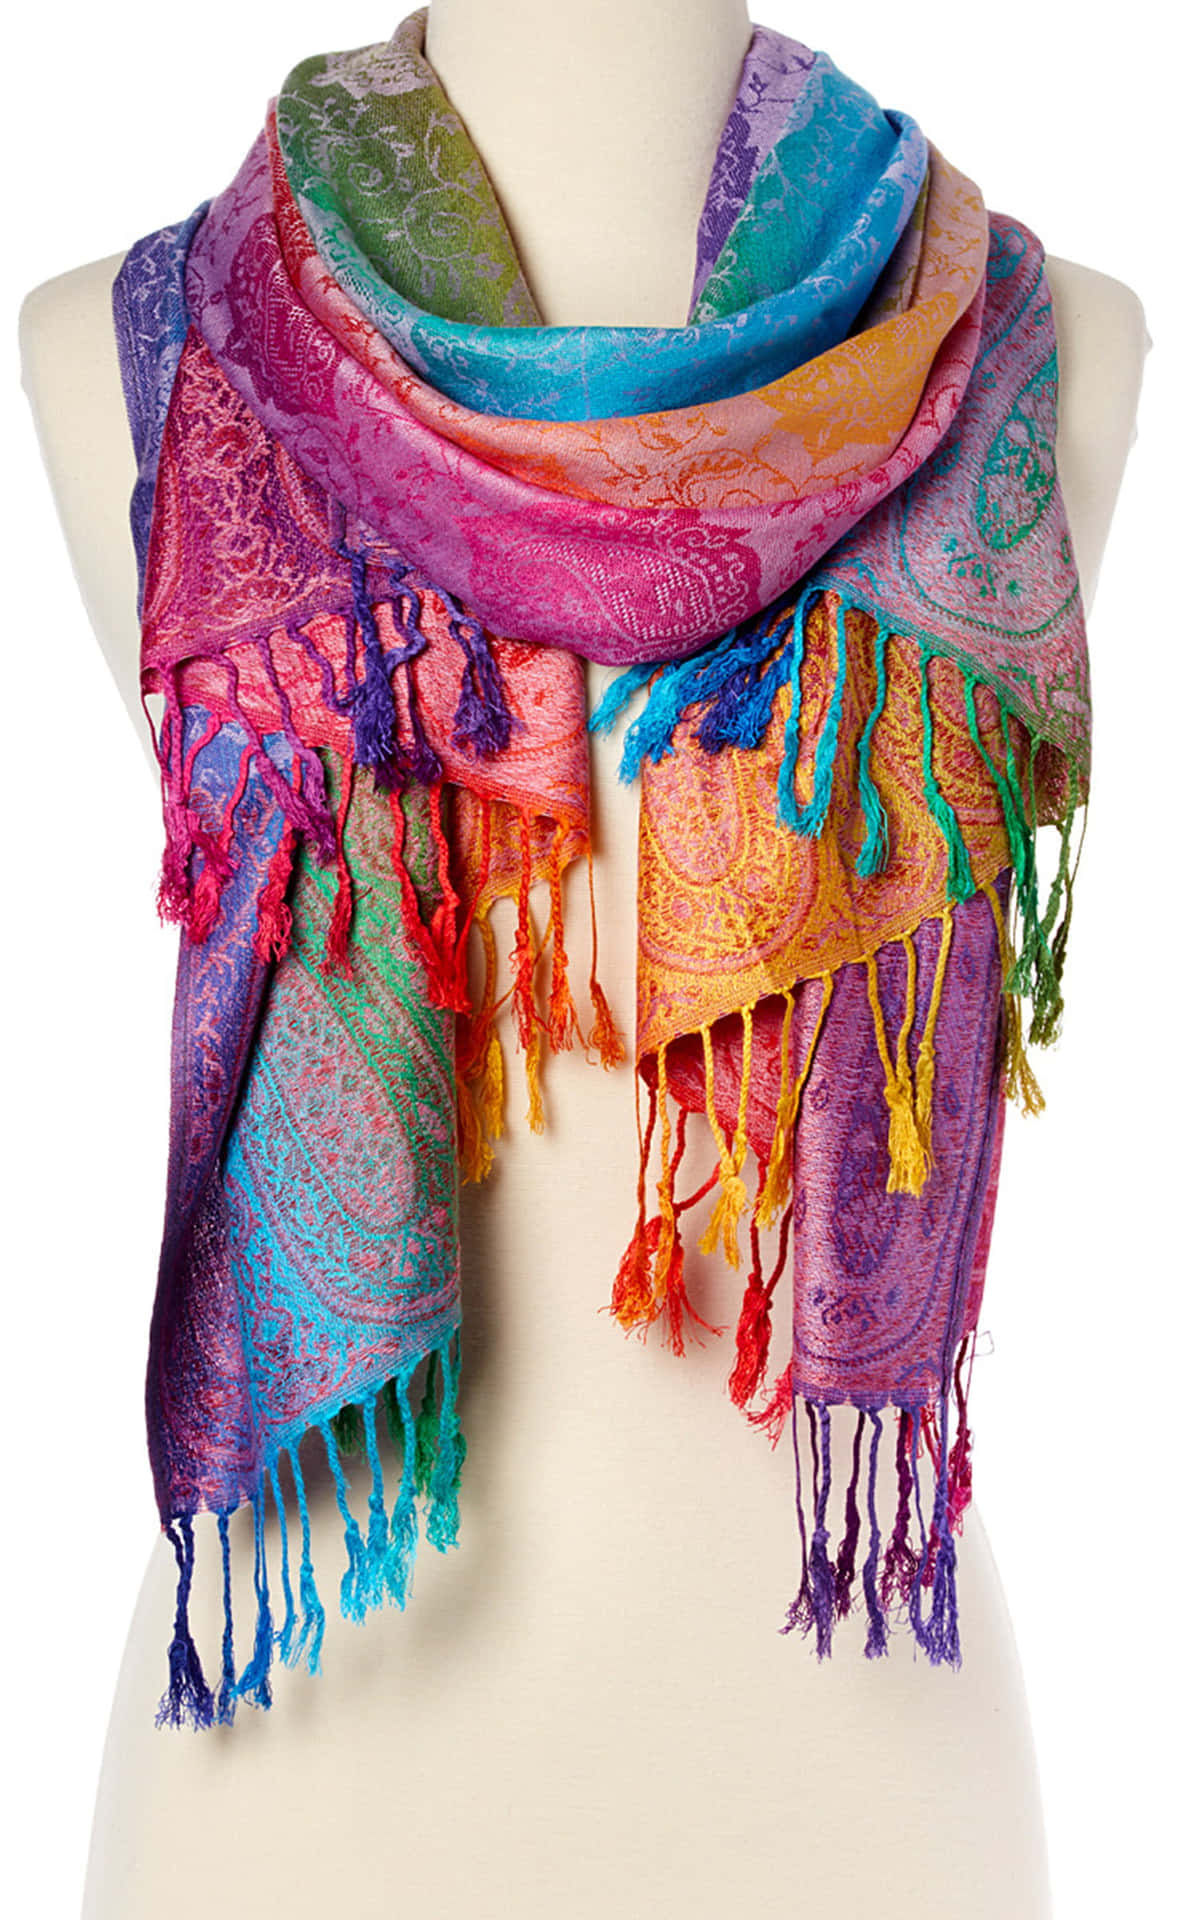 Elegant Purple Scarf With Intricate Detail Wallpaper